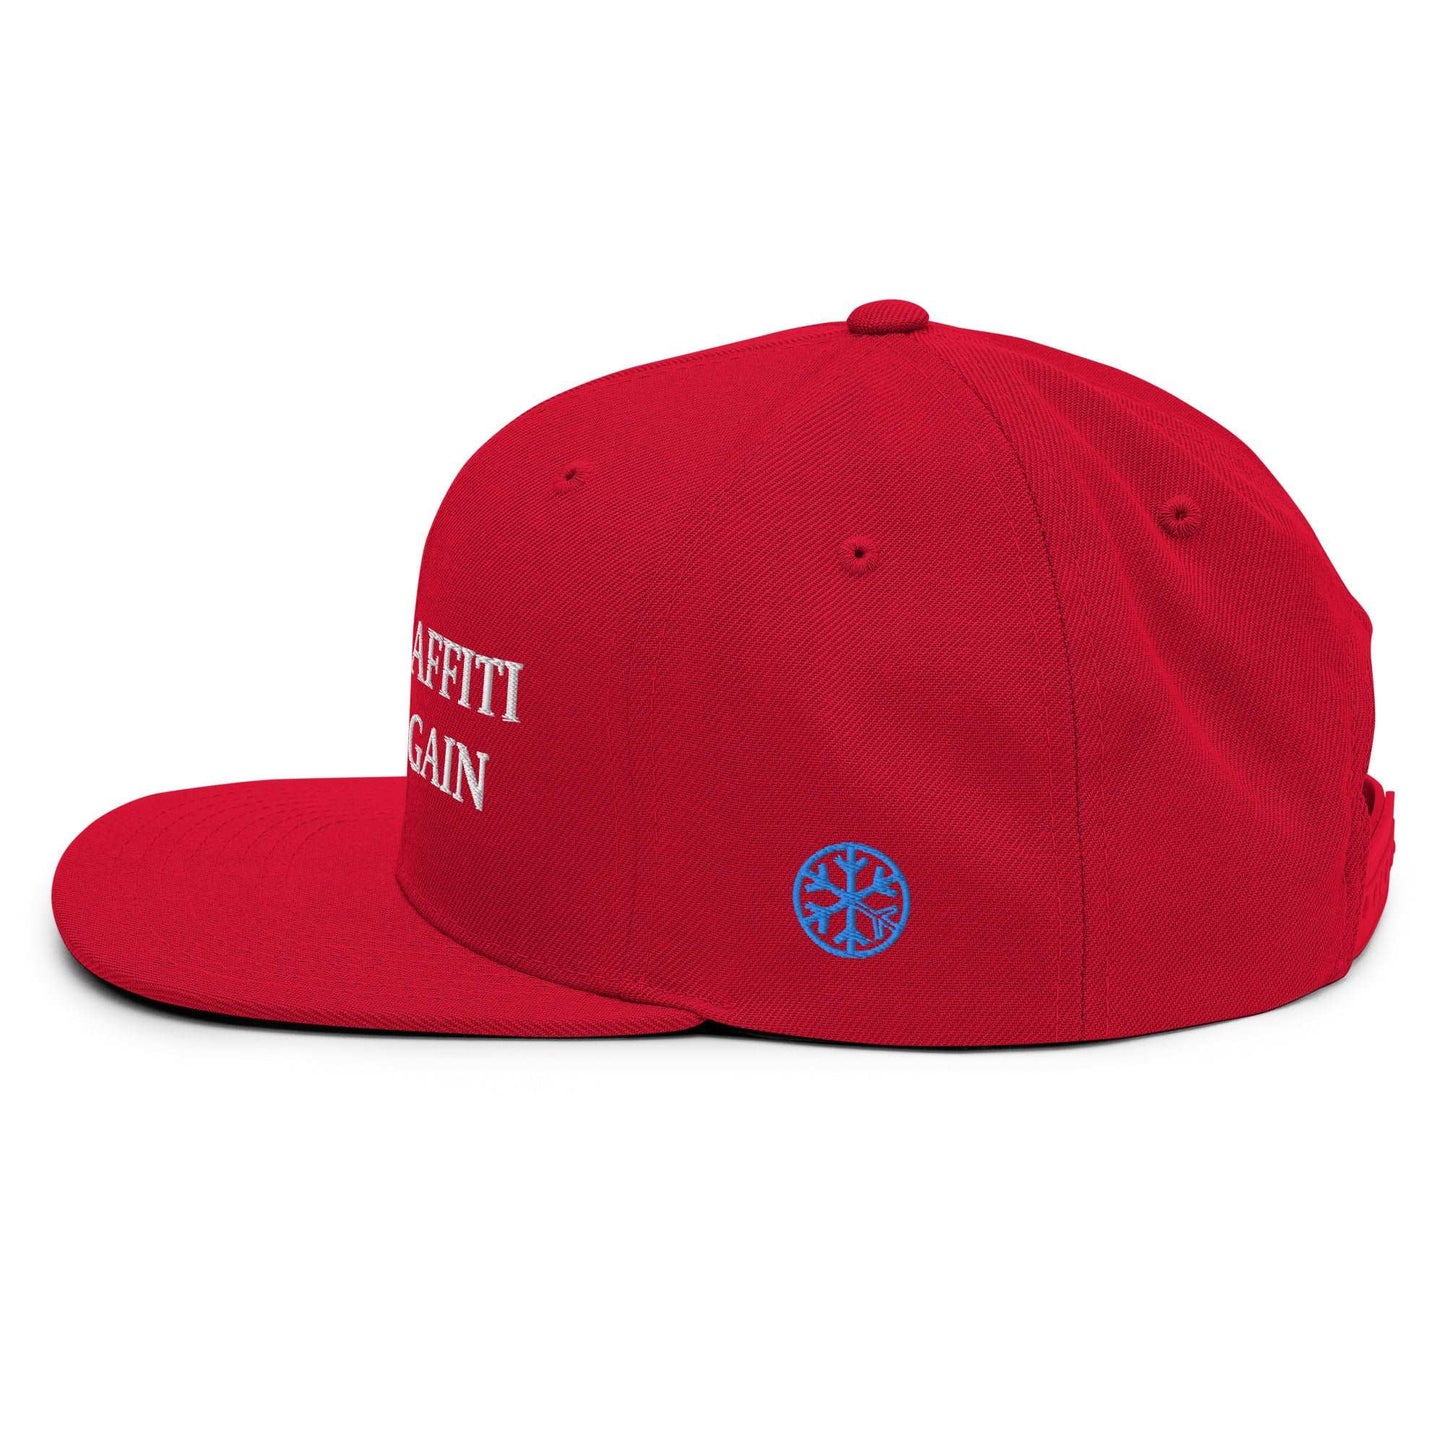 side of make graffiti great again snapback red by b.different clothing graffiti and street art inspired streetwear brand for weirdos, misfits, and outcasts.